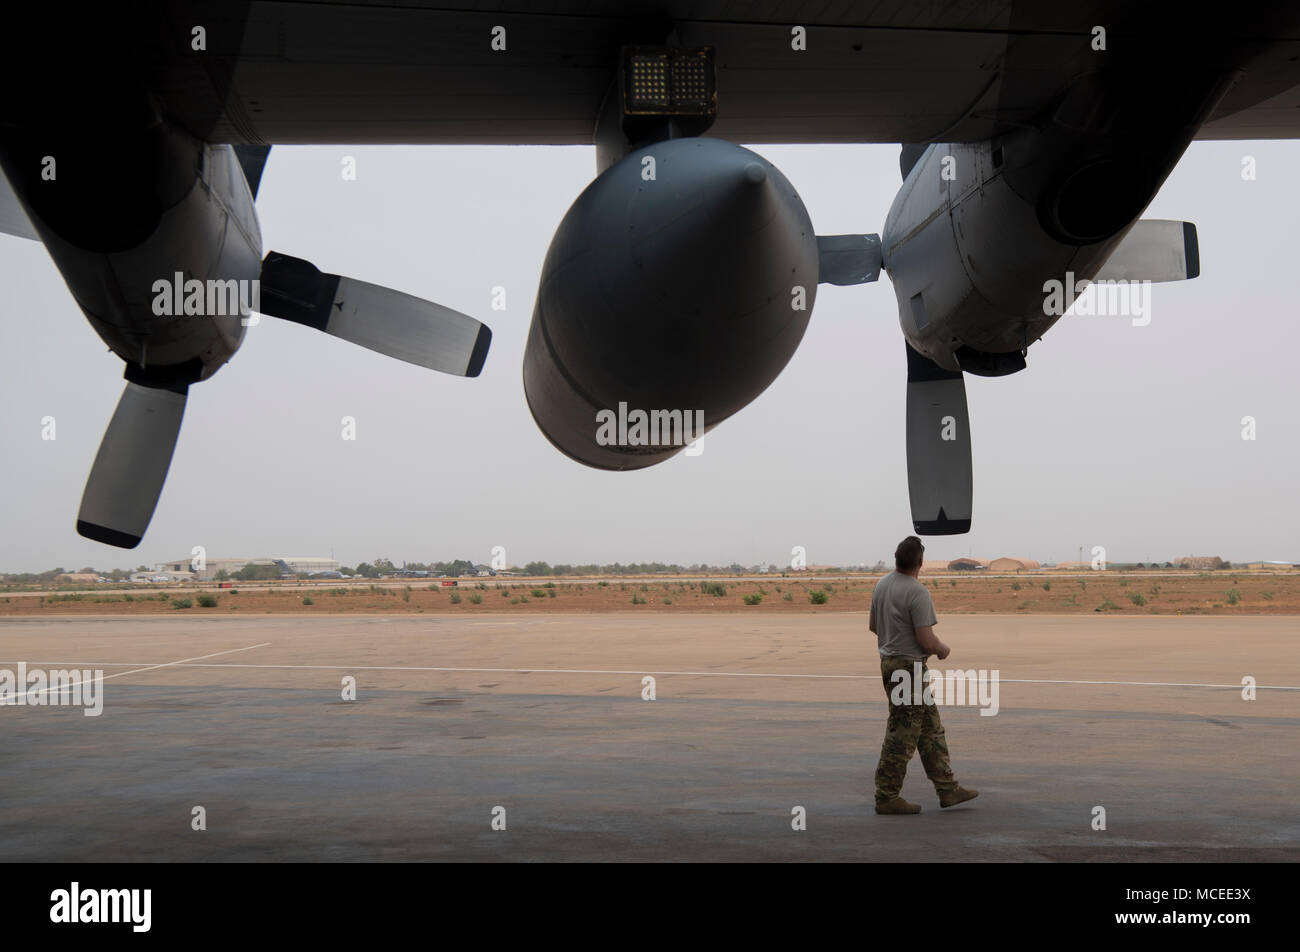 A loadmaster from the West Virginia Air National Guard inspects the propellers of a C-130H Hercules April 10, 2018 at Diori Hamani International Airport, Niger. Approximately 1,900 service members from more than 20 African and western partner nations are participating in Flintlock 2018 at multiple locations in Niger, Burkina Faso, and Senegal. Flintlock is an annual, African-led, integrated military and law enforcement exercise that has strengthened key partner nation forces throughout North and West Africa as well as western Special Operations Forces since 2005.  (U.S. Air Force photo/Senior  Stock Photo